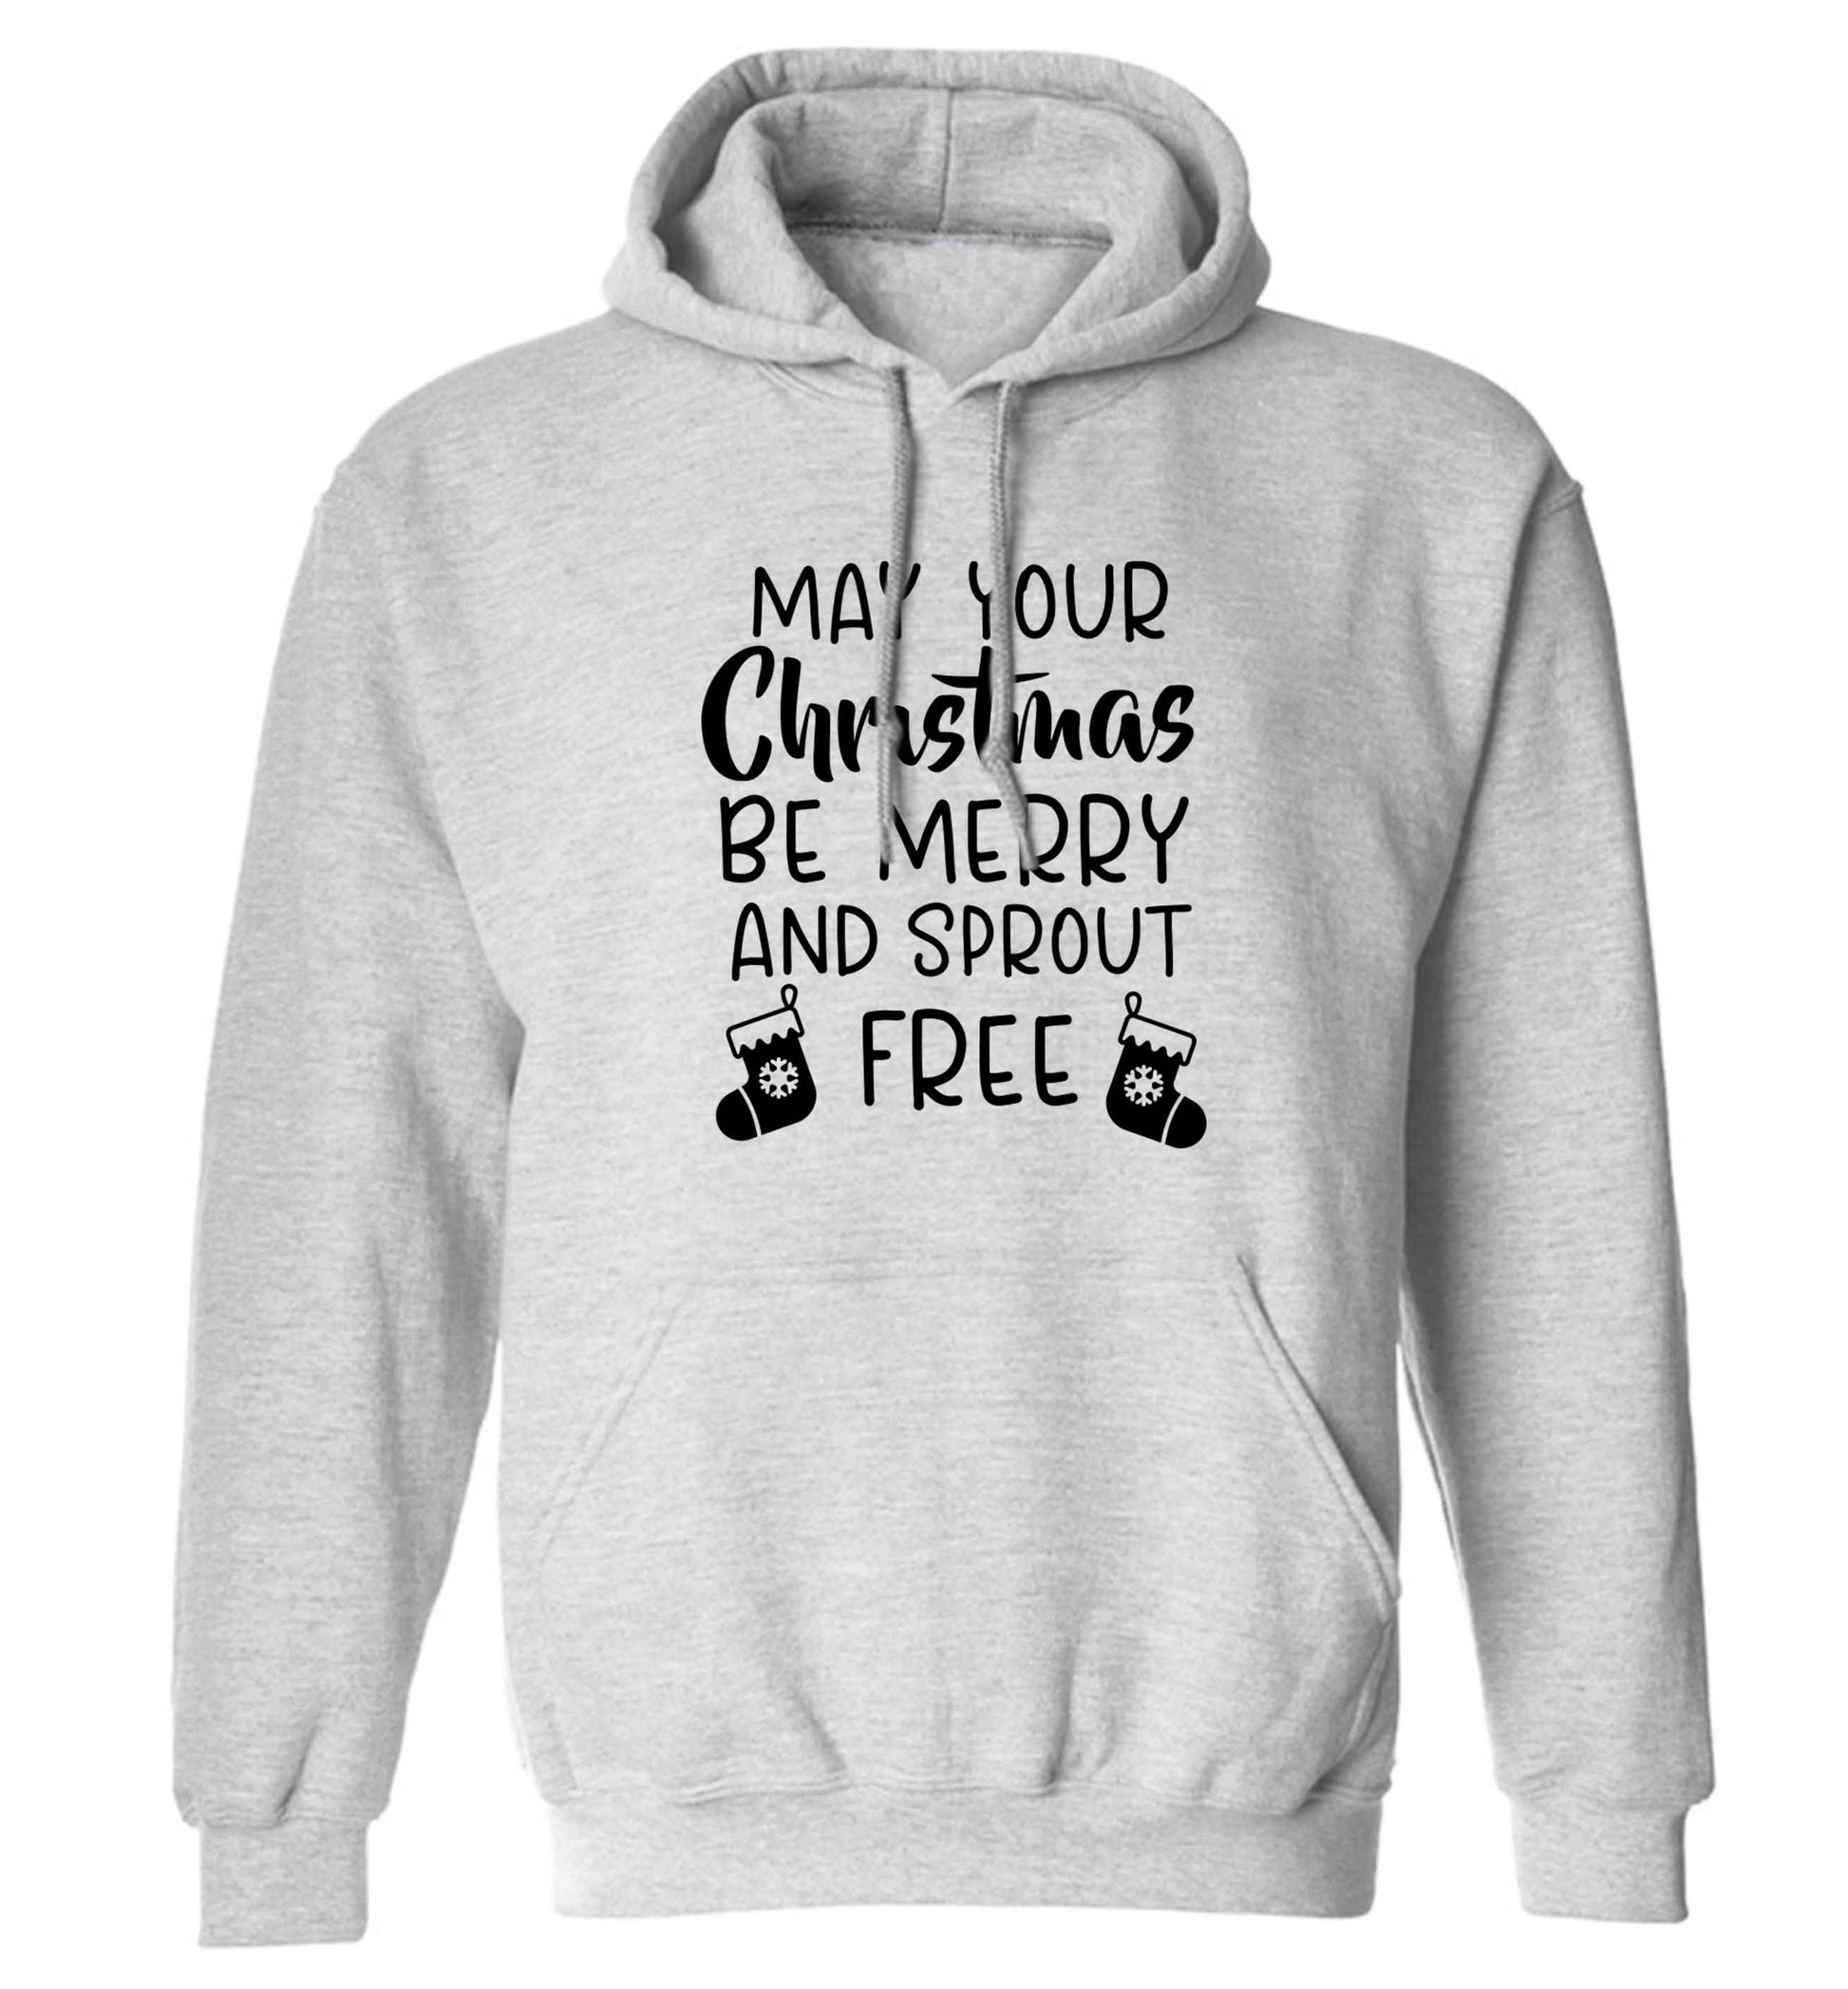 May your Christmas be merry and sprout free adults unisex grey hoodie 2XL